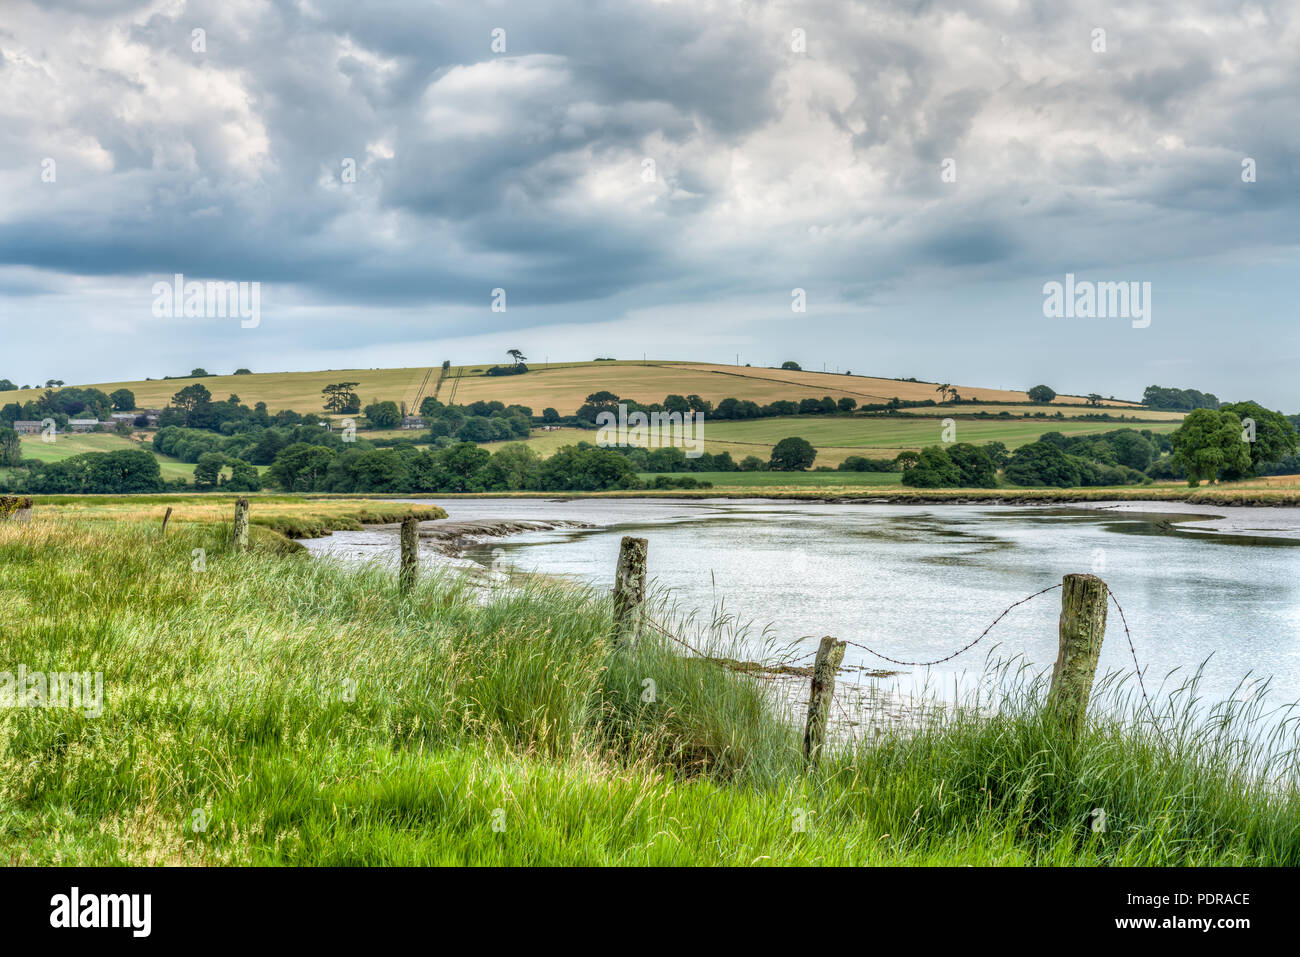 A landscape of the River Lyner which leads off the River Tamar at Plymouth, South Devon. Swirling cloud above sunburnt farmland is in the background. Stock Photo